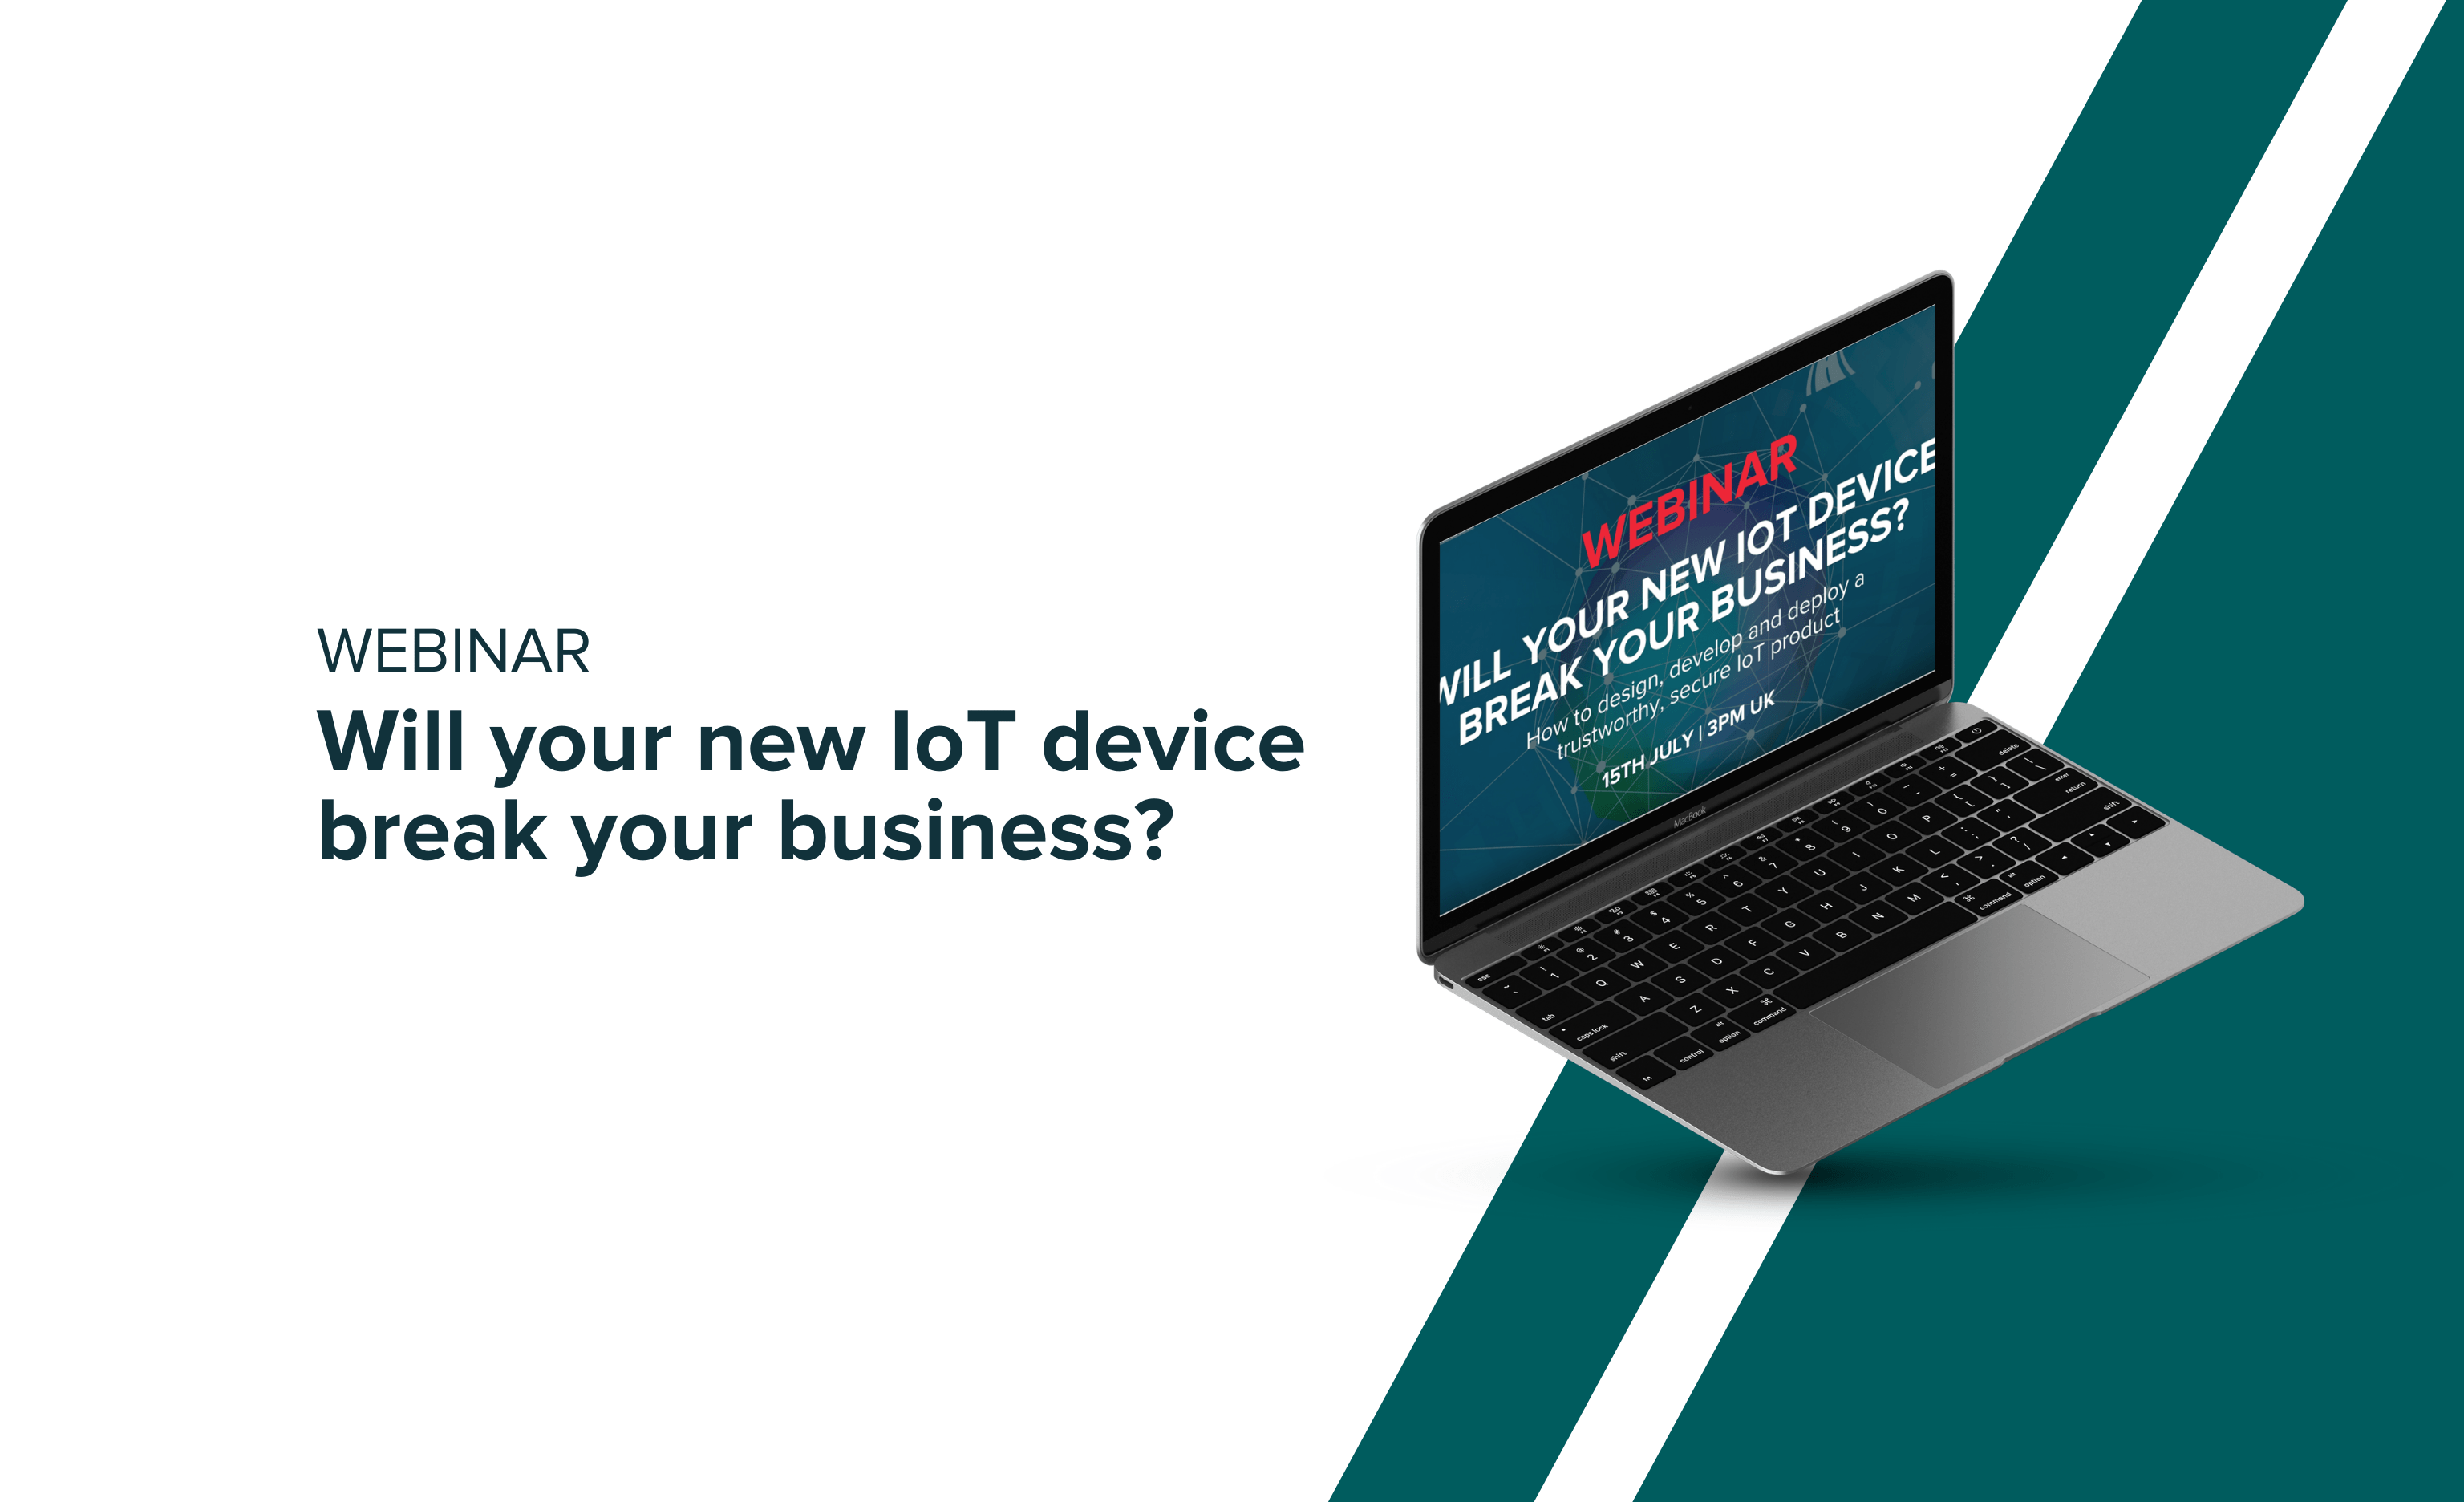 Will your new IoT device break your business?